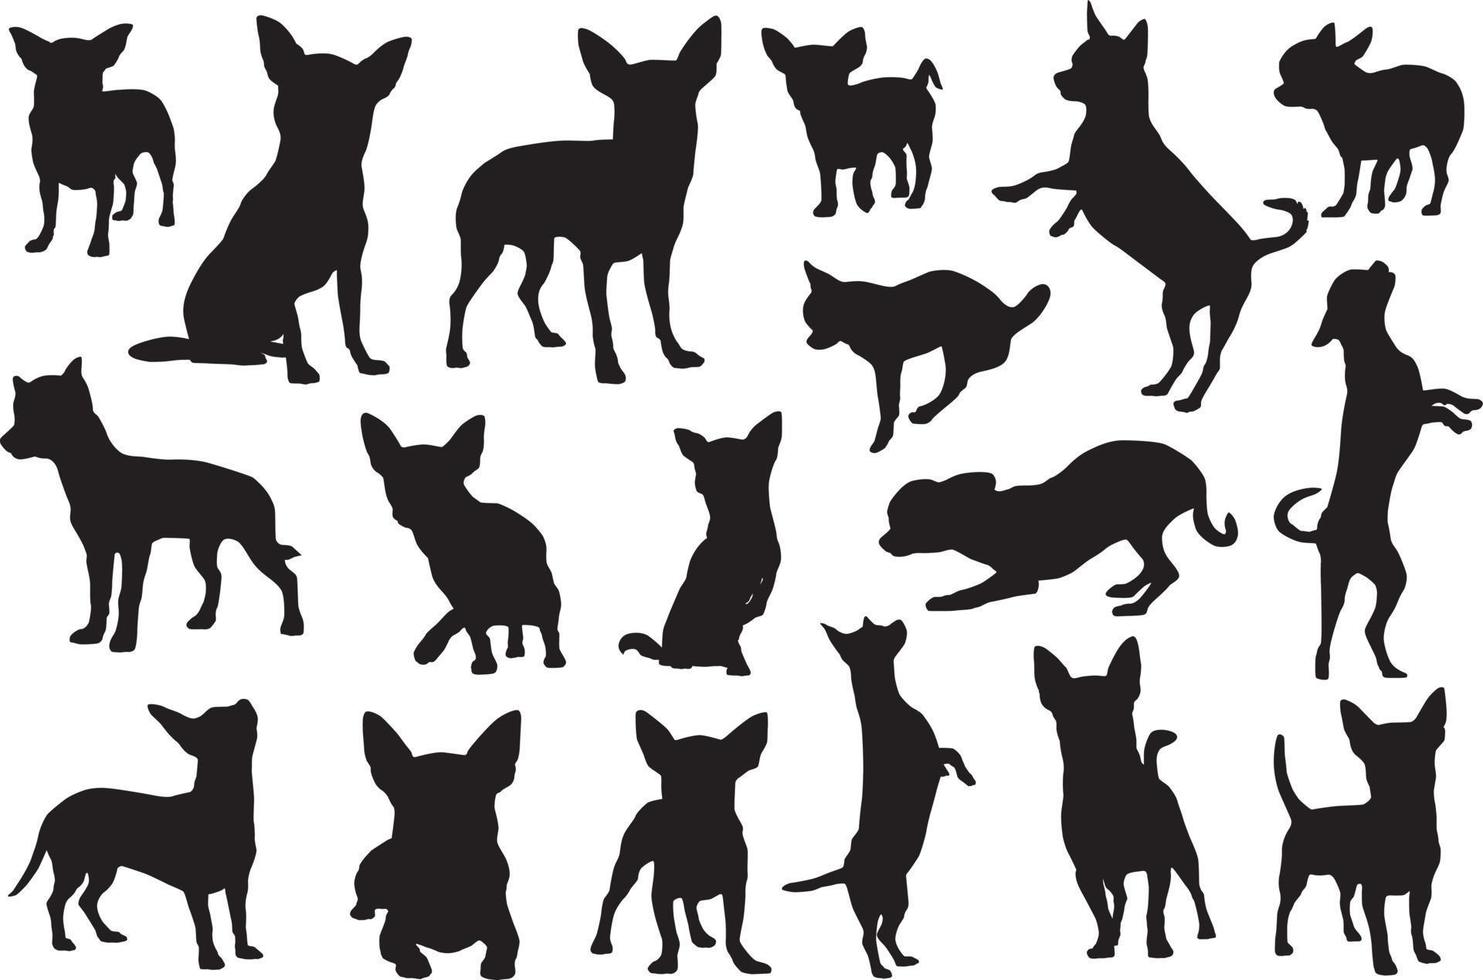 Chihuahua dog silhouettes vector